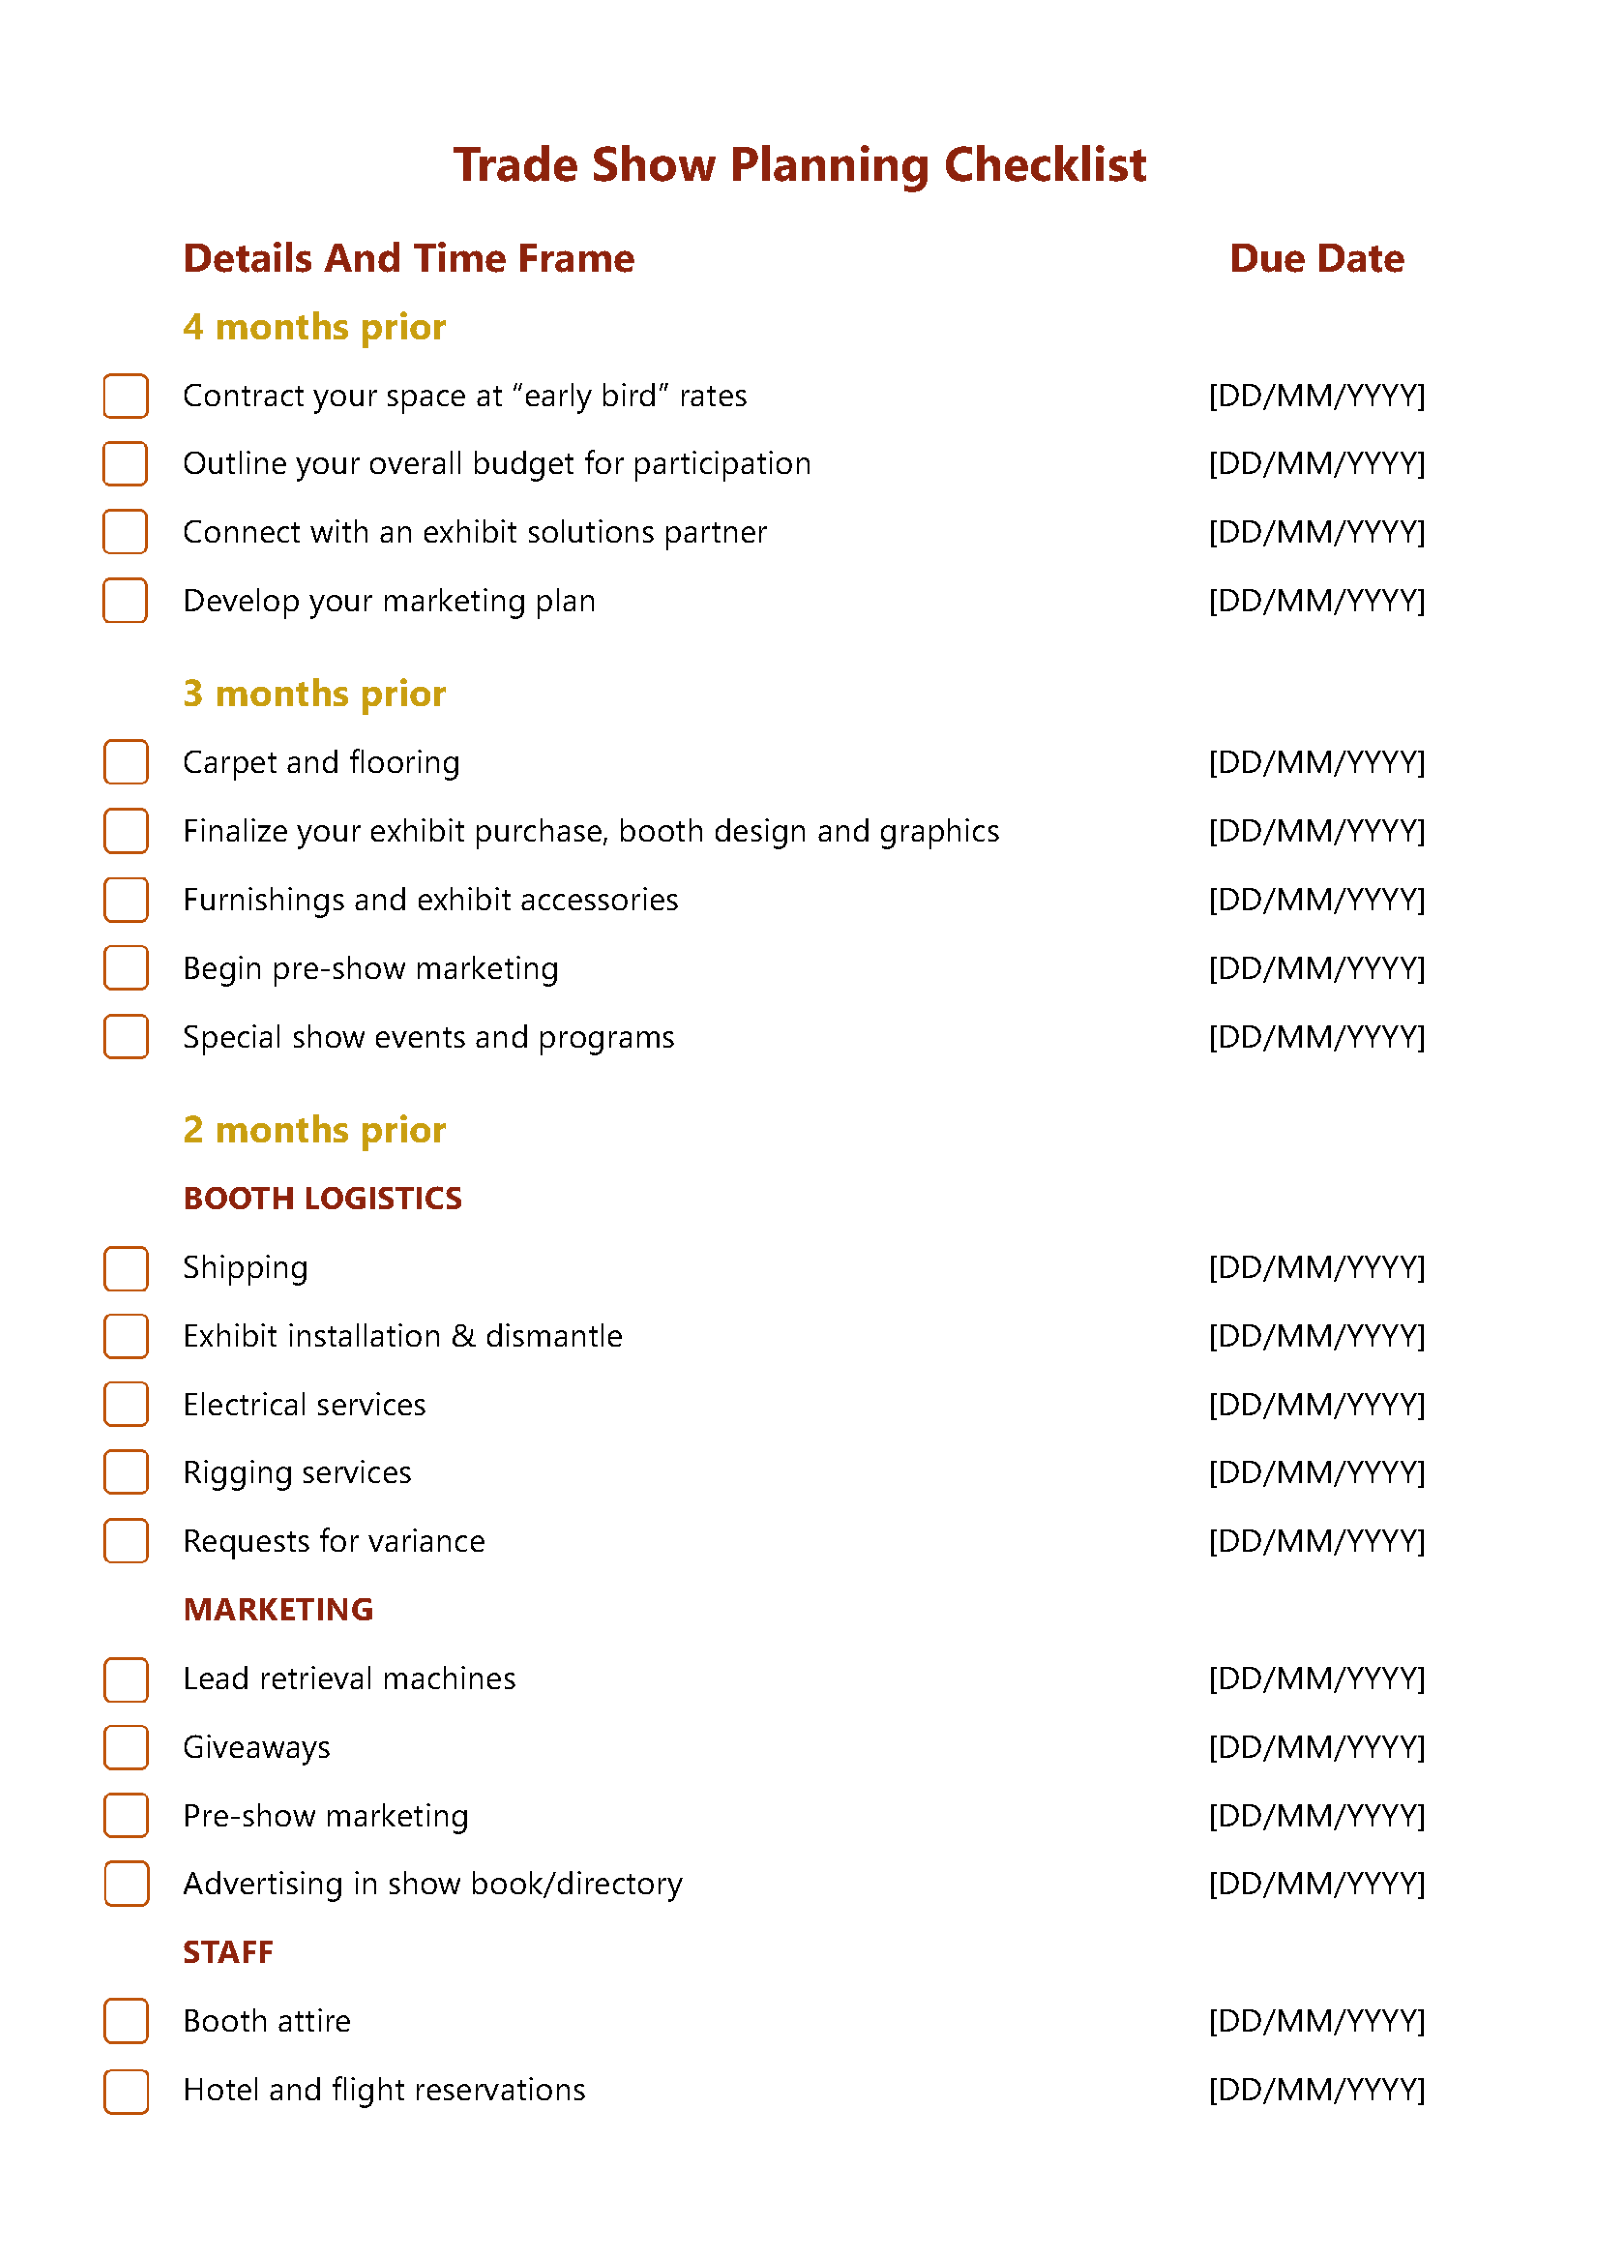 Trade Show Planning Checklist Template for Event Managers